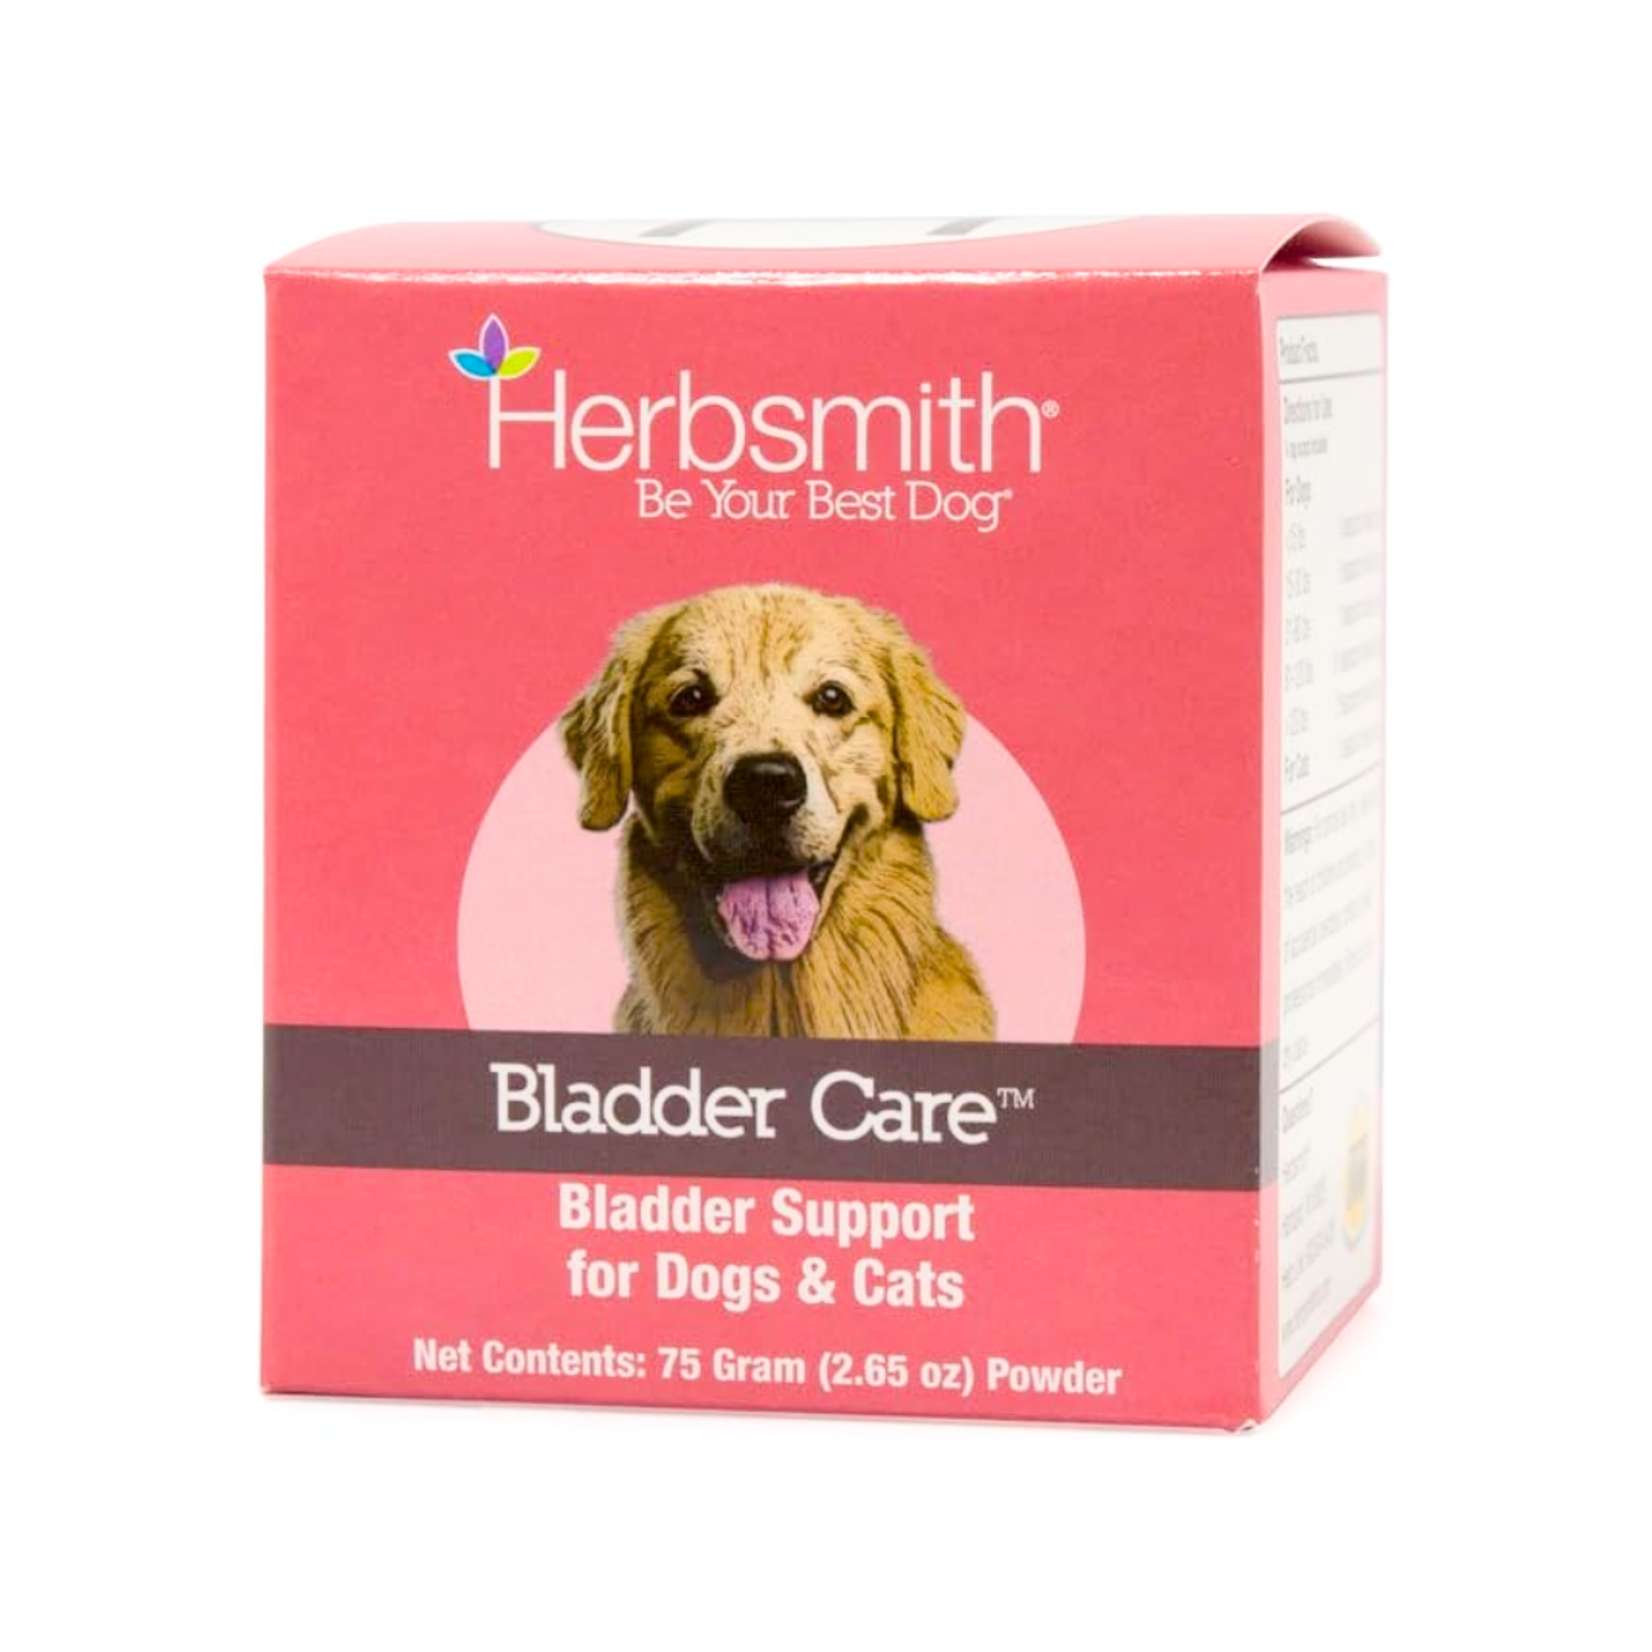 Herbsmith 75 g. Powder - Bladder Care for Dogs & Cats - Herbsmith